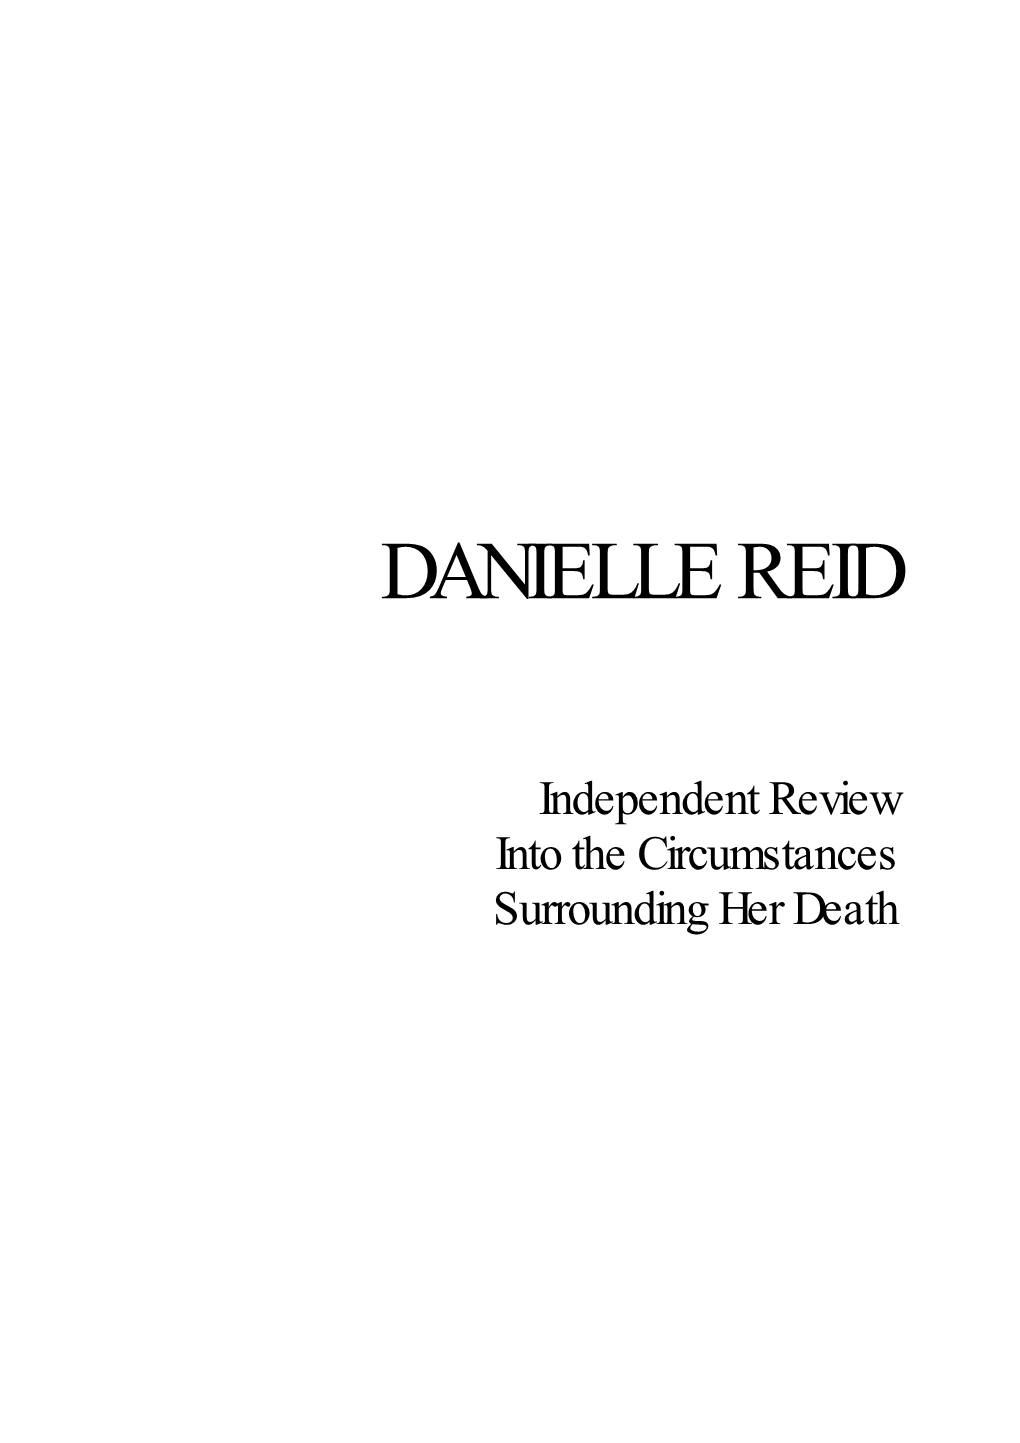 Independent Review Into the Circumstances Surrounding the Death of Danielle Reid